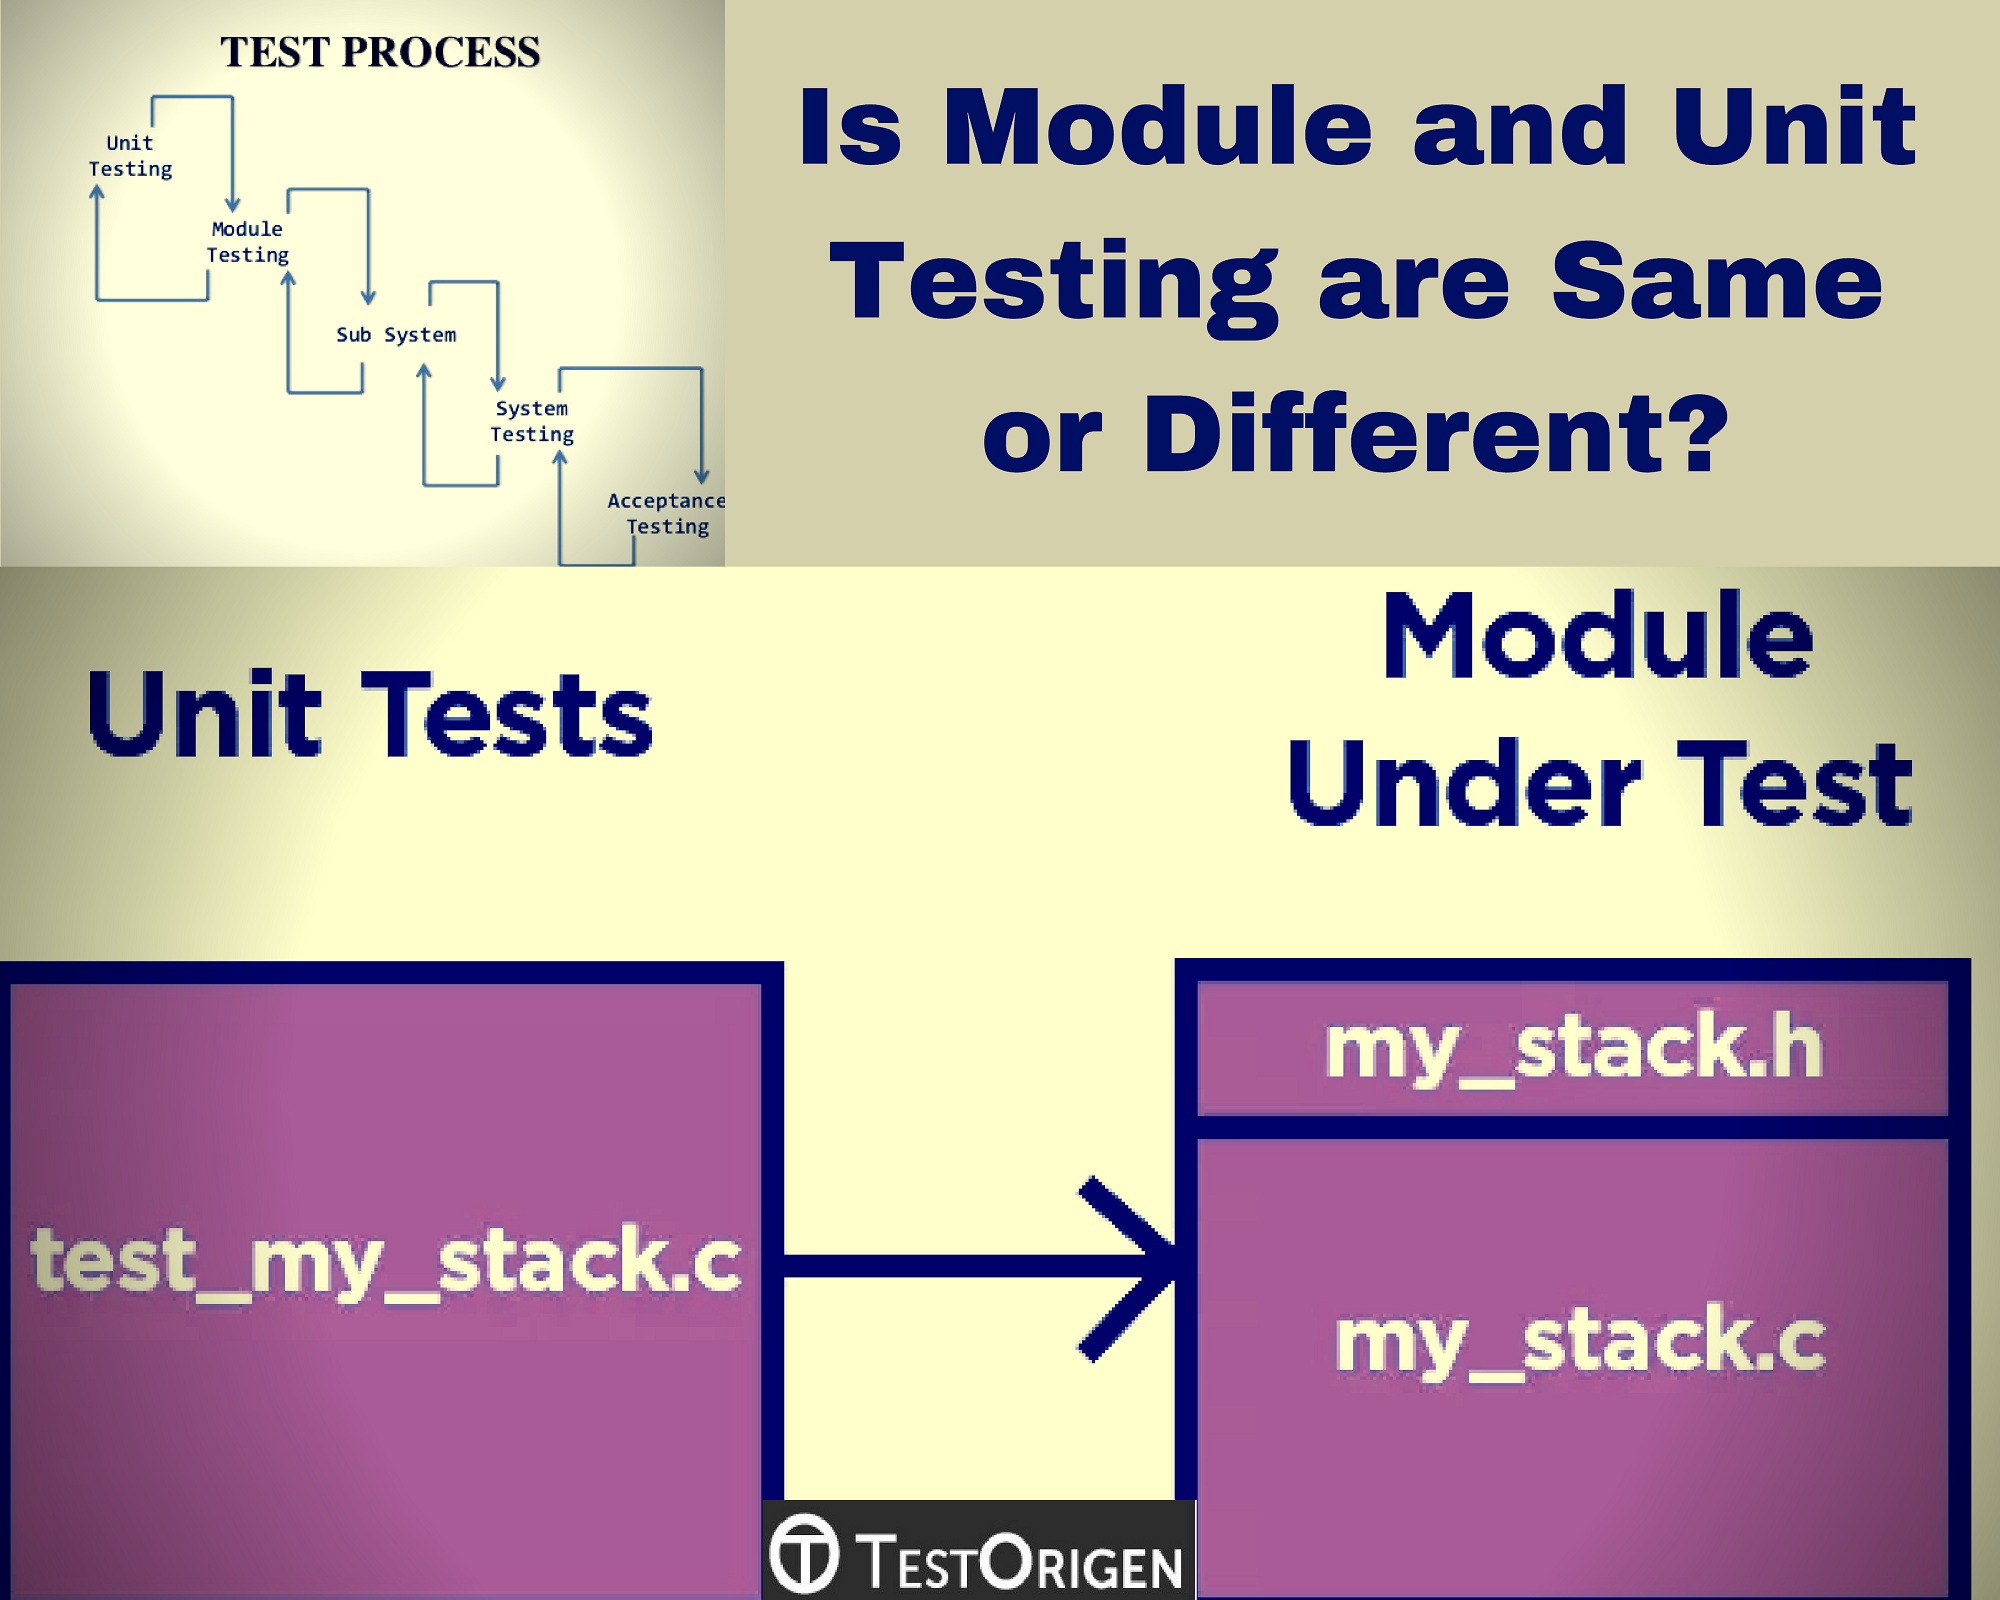 Is Module and Unit Testing are Same or Different?